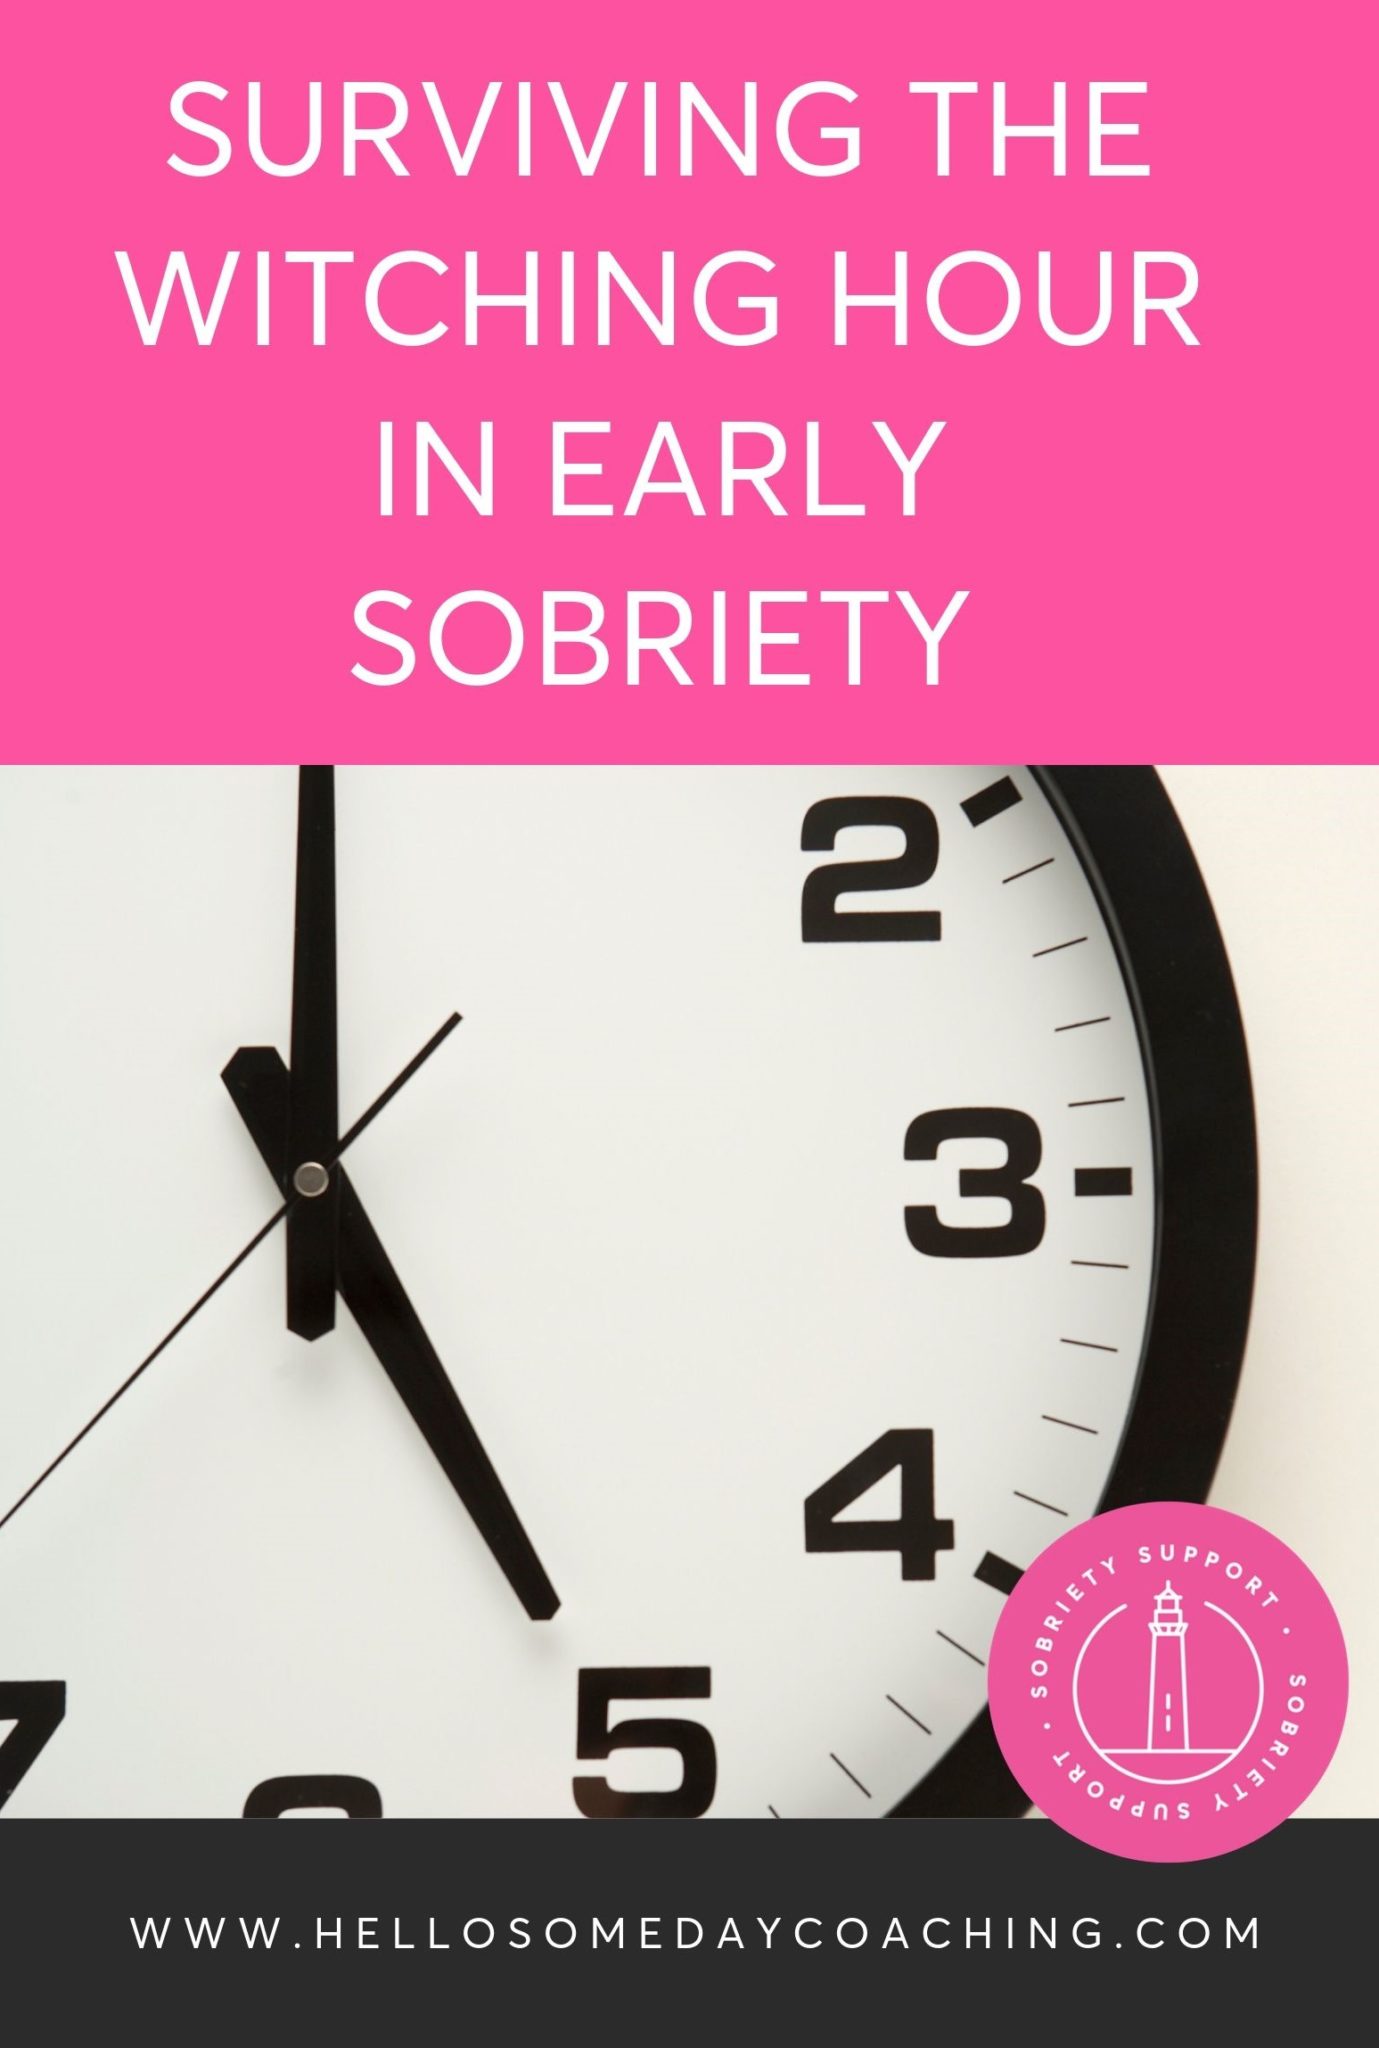 How To Survive The Witching Hour in Early Sobriety